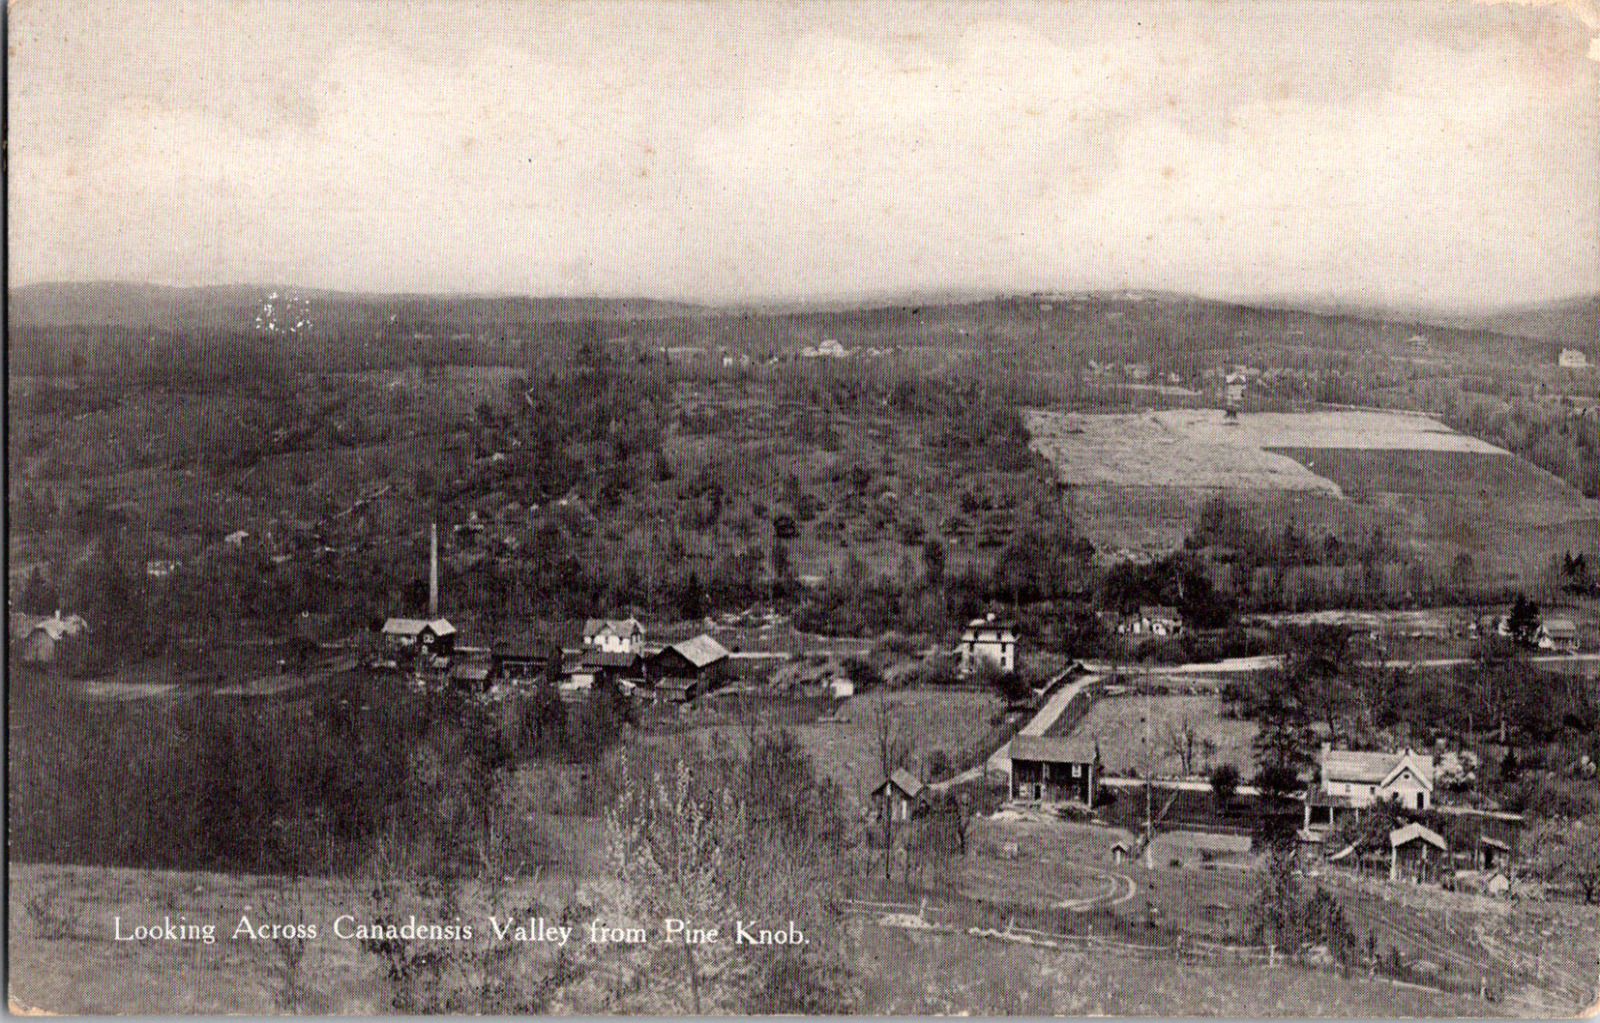 C.1910 Birds Eye View of Pine Knob Pennsylvania From Canadensis Valley Postcard 